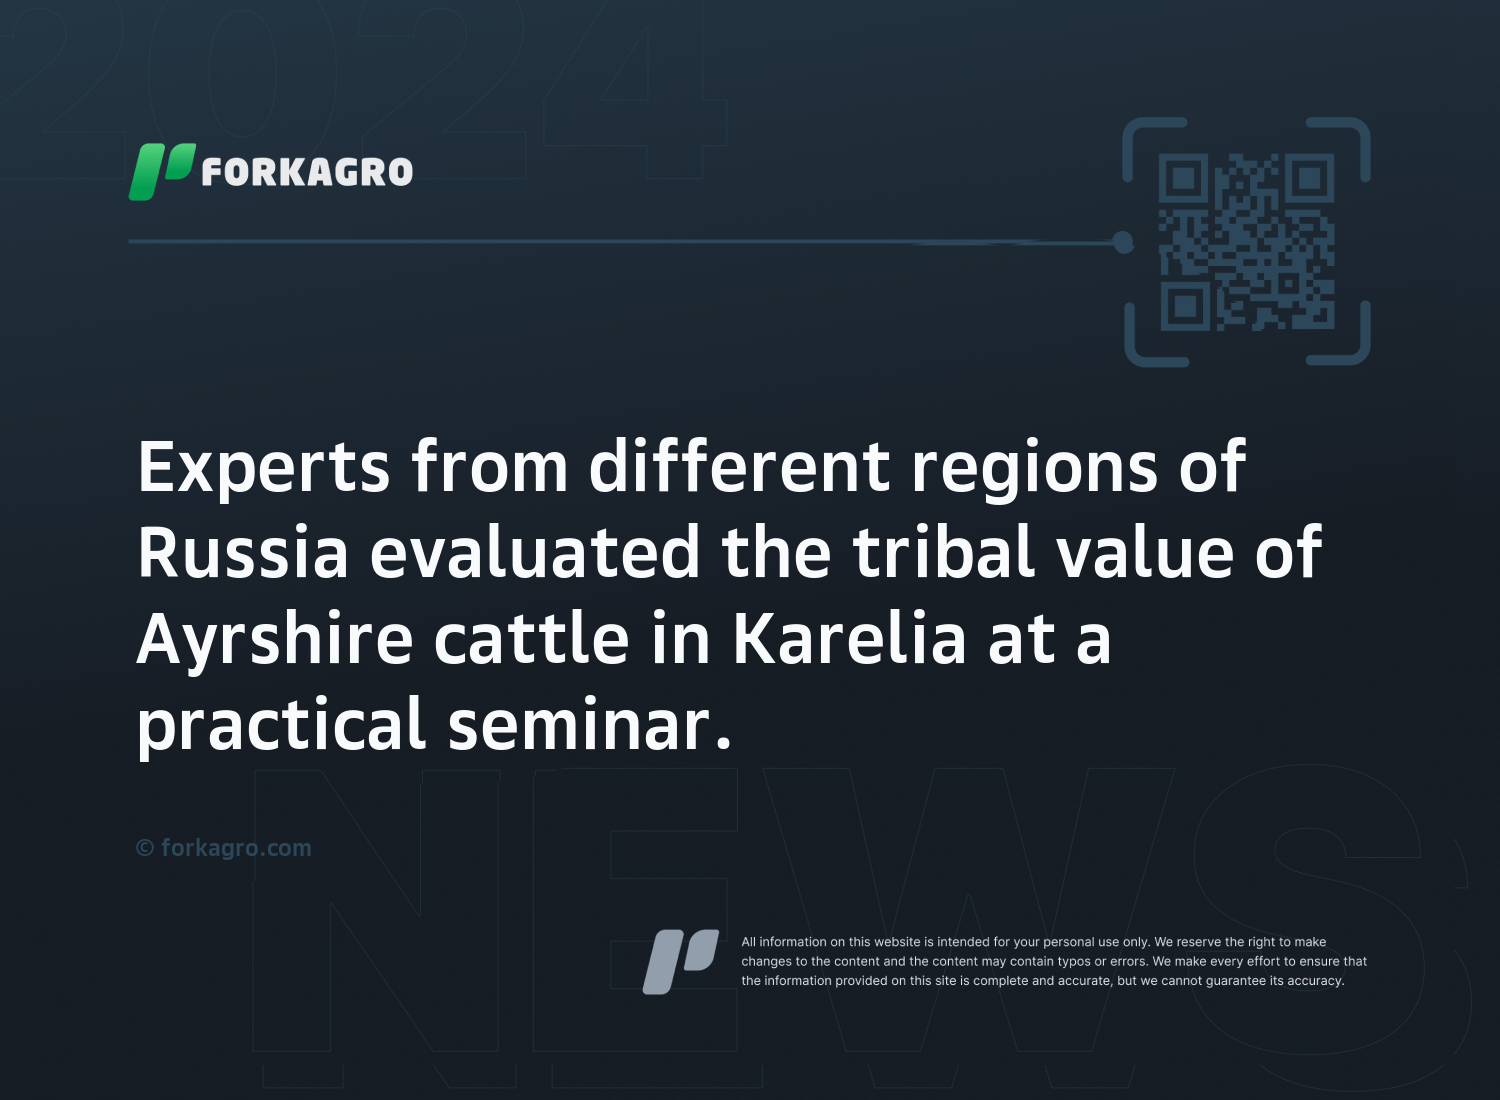 Experts from different regions of Russia evaluated the tribal value of Ayrshire cattle in Karelia at a practical seminar.